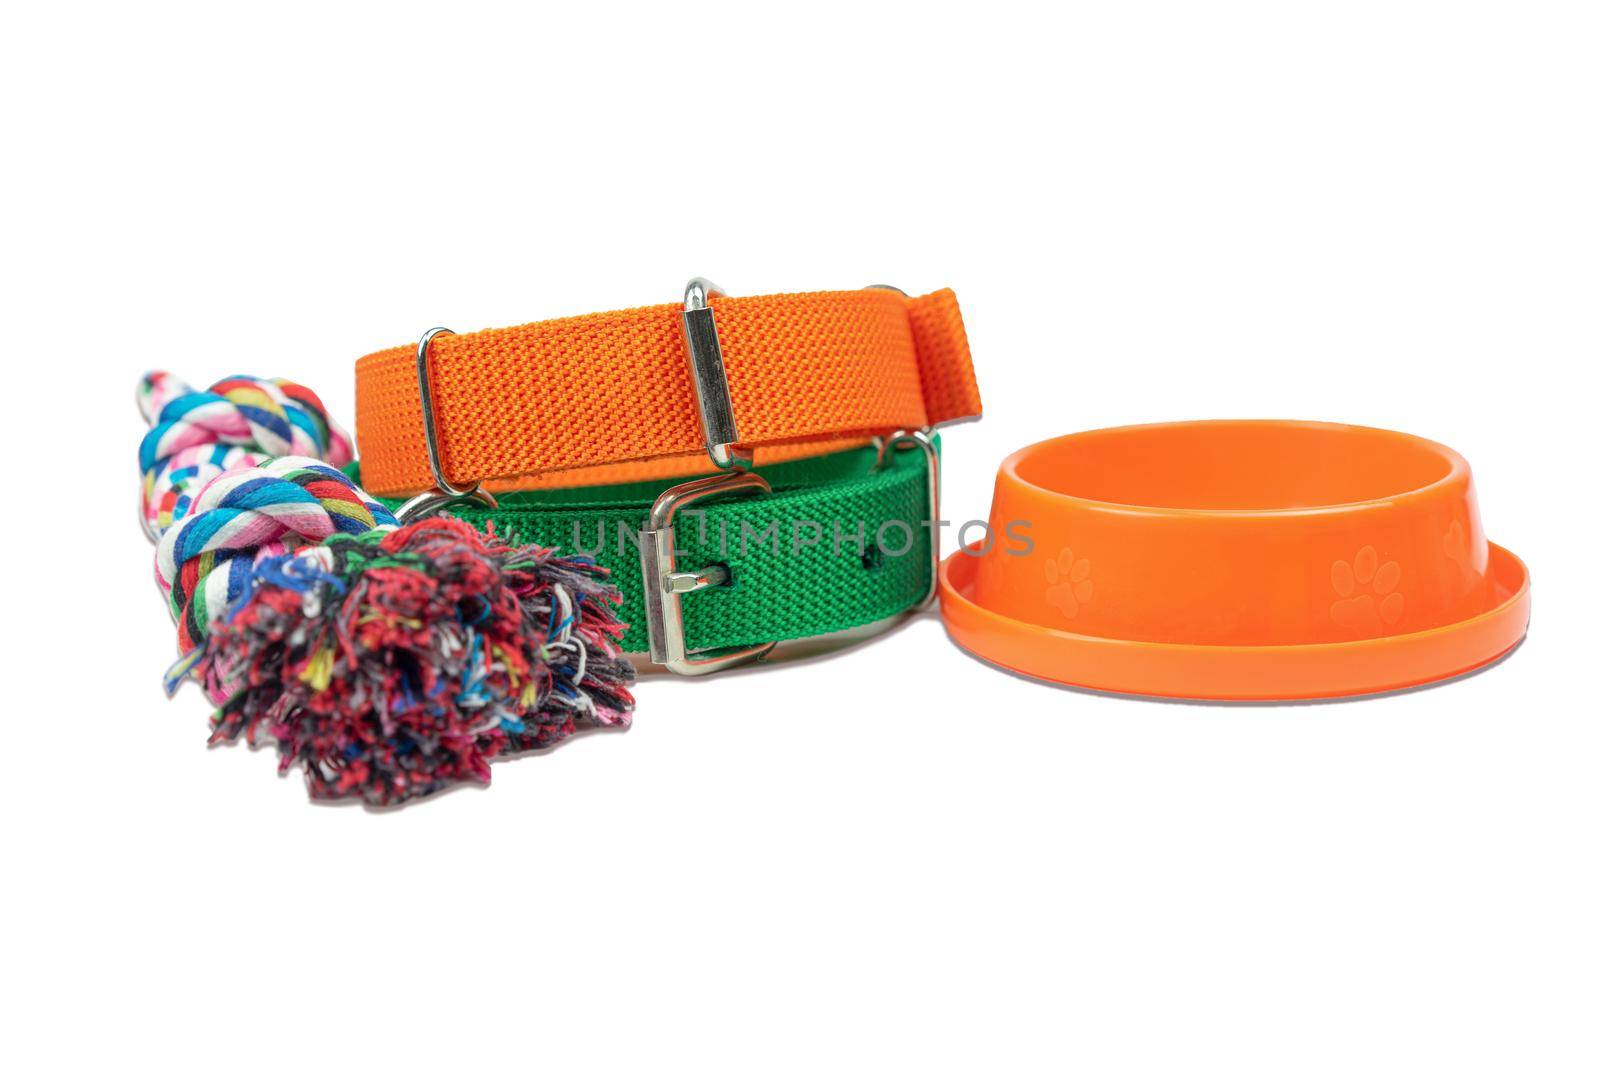 Dog collars and bowl on isolated white.  Pet shop